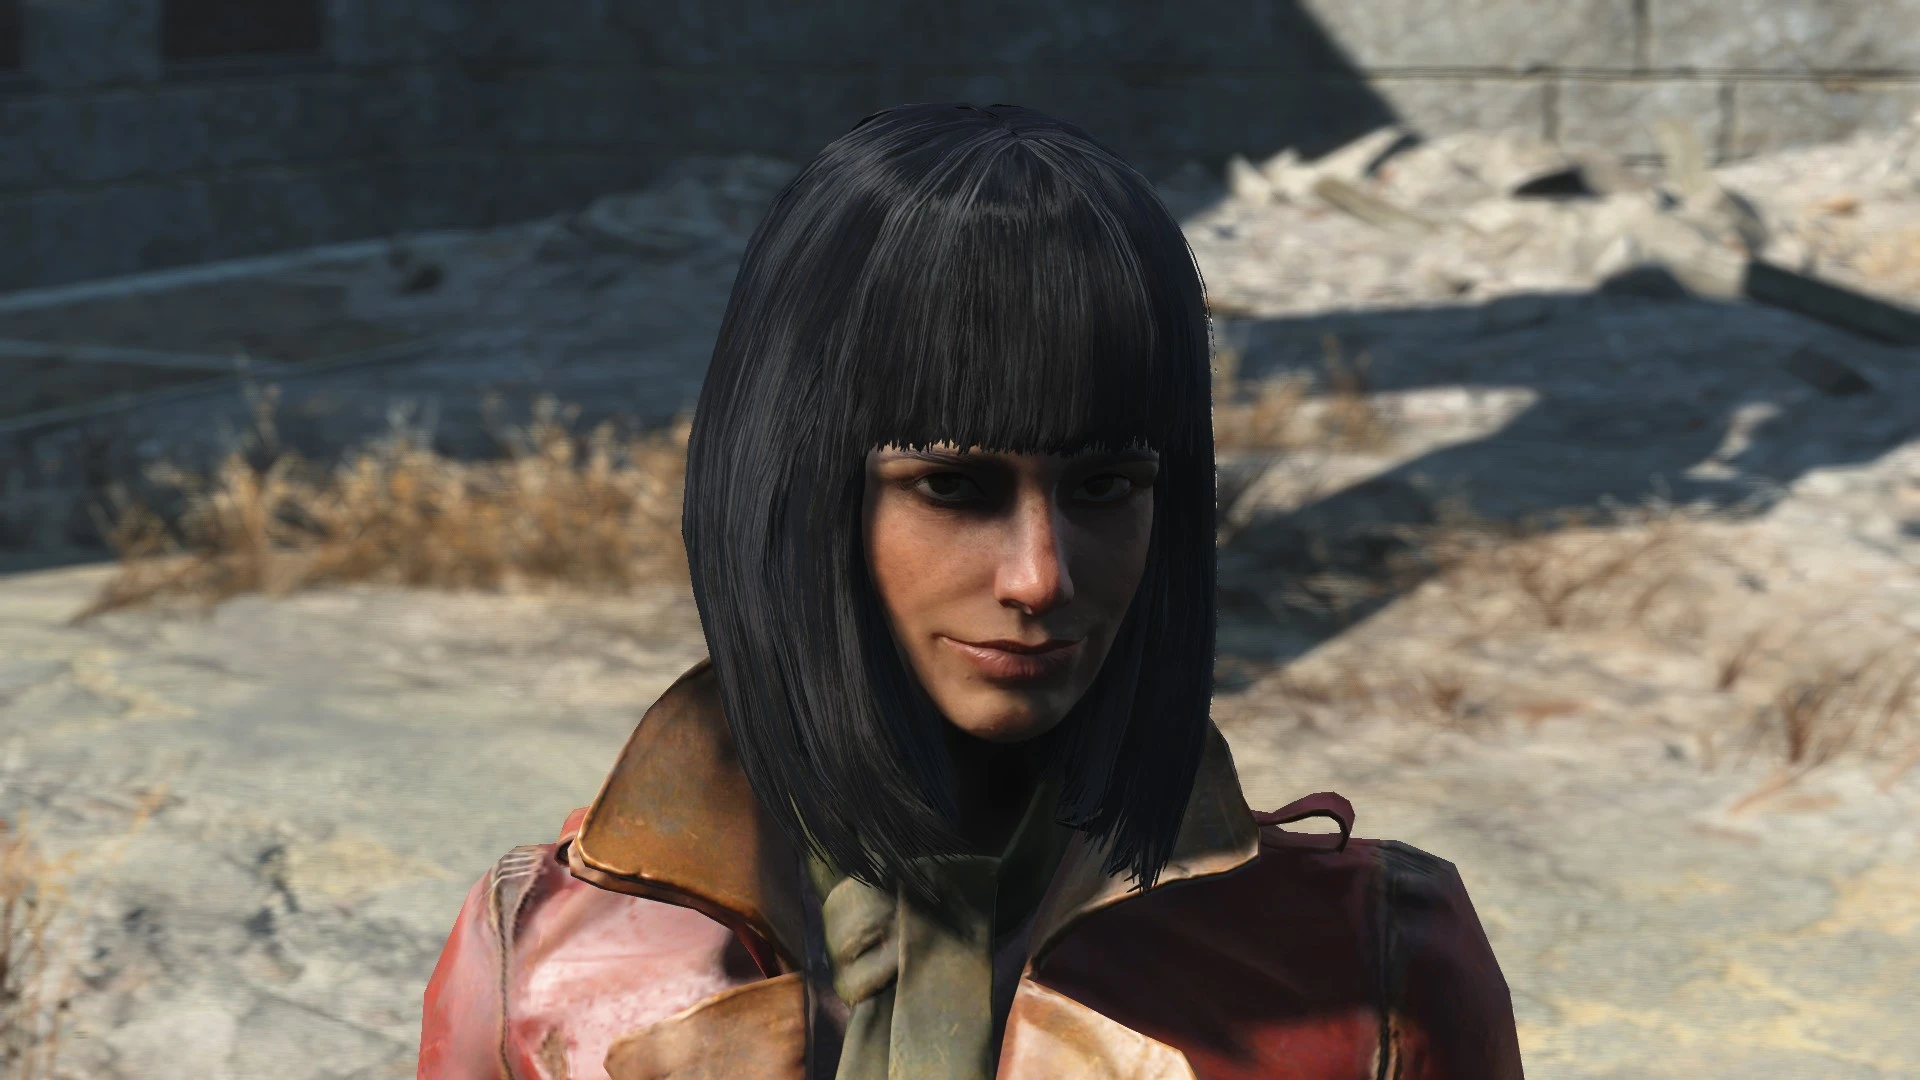 fallout 4 more hairstyles mod